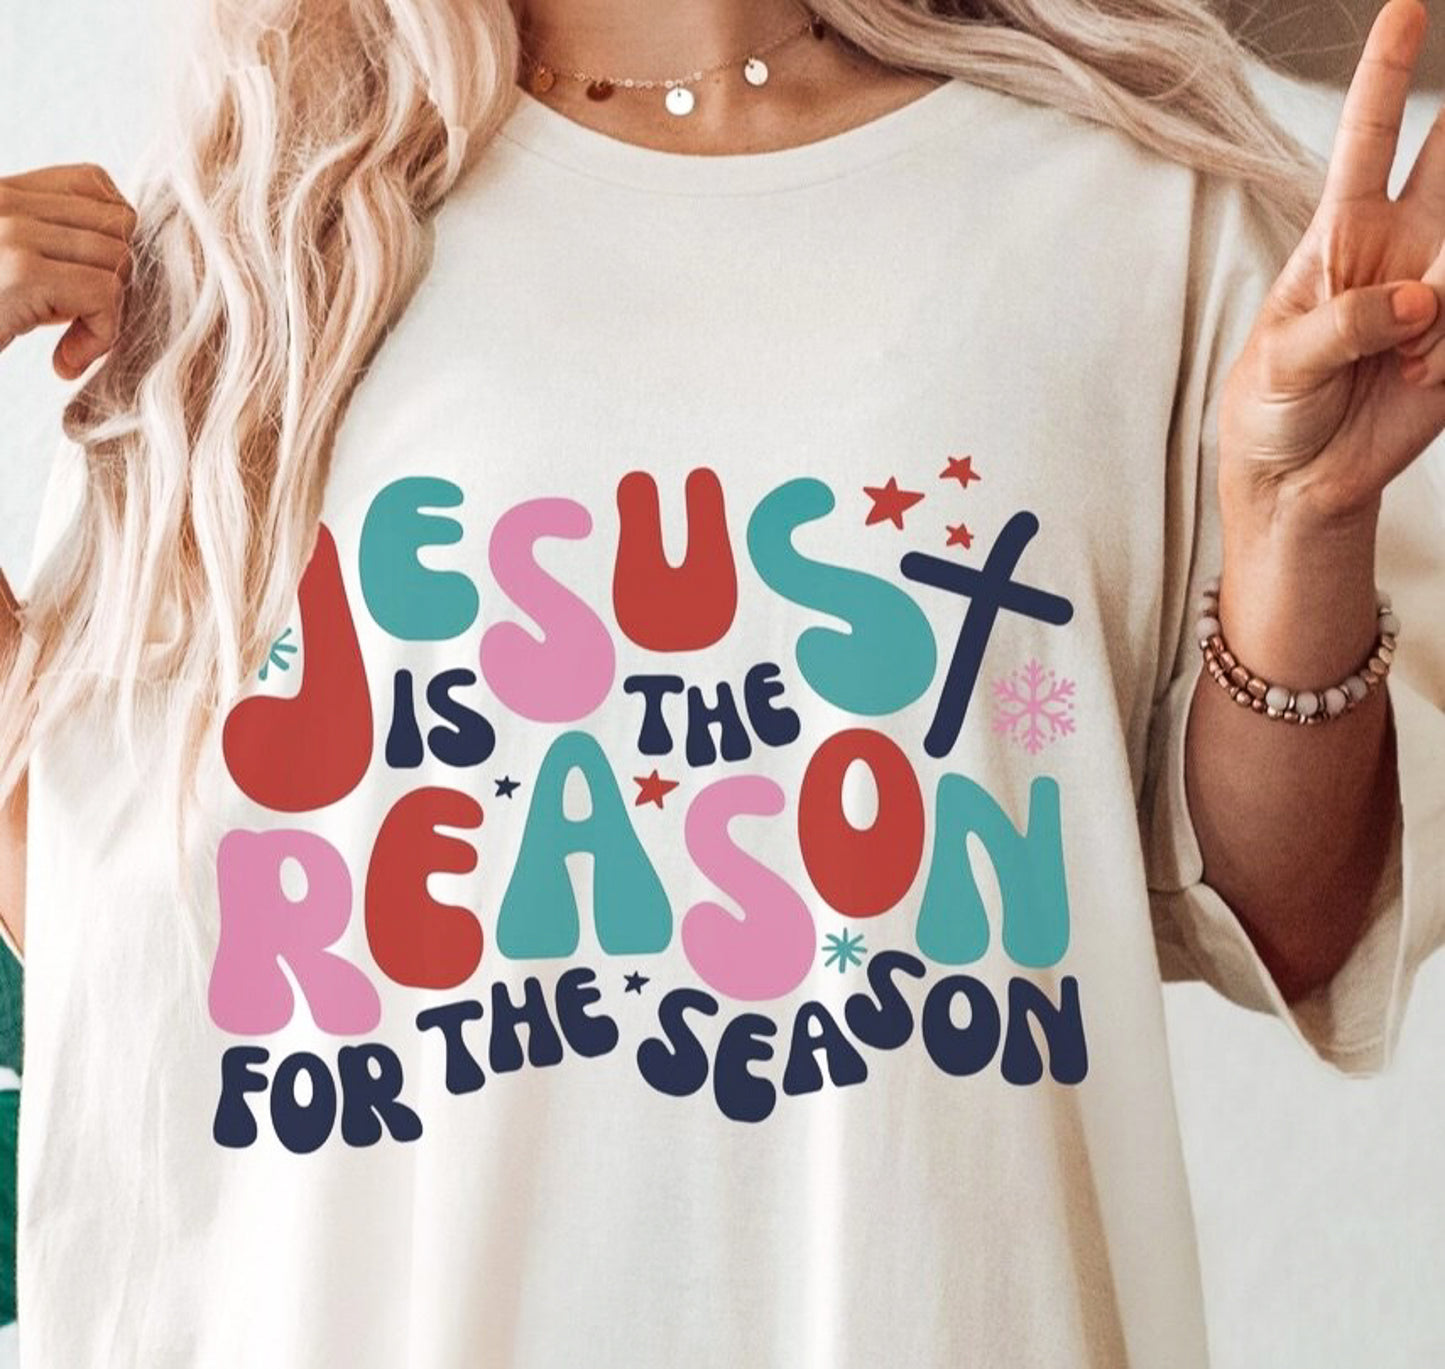 Jesus Is The Reason For the Season Tee